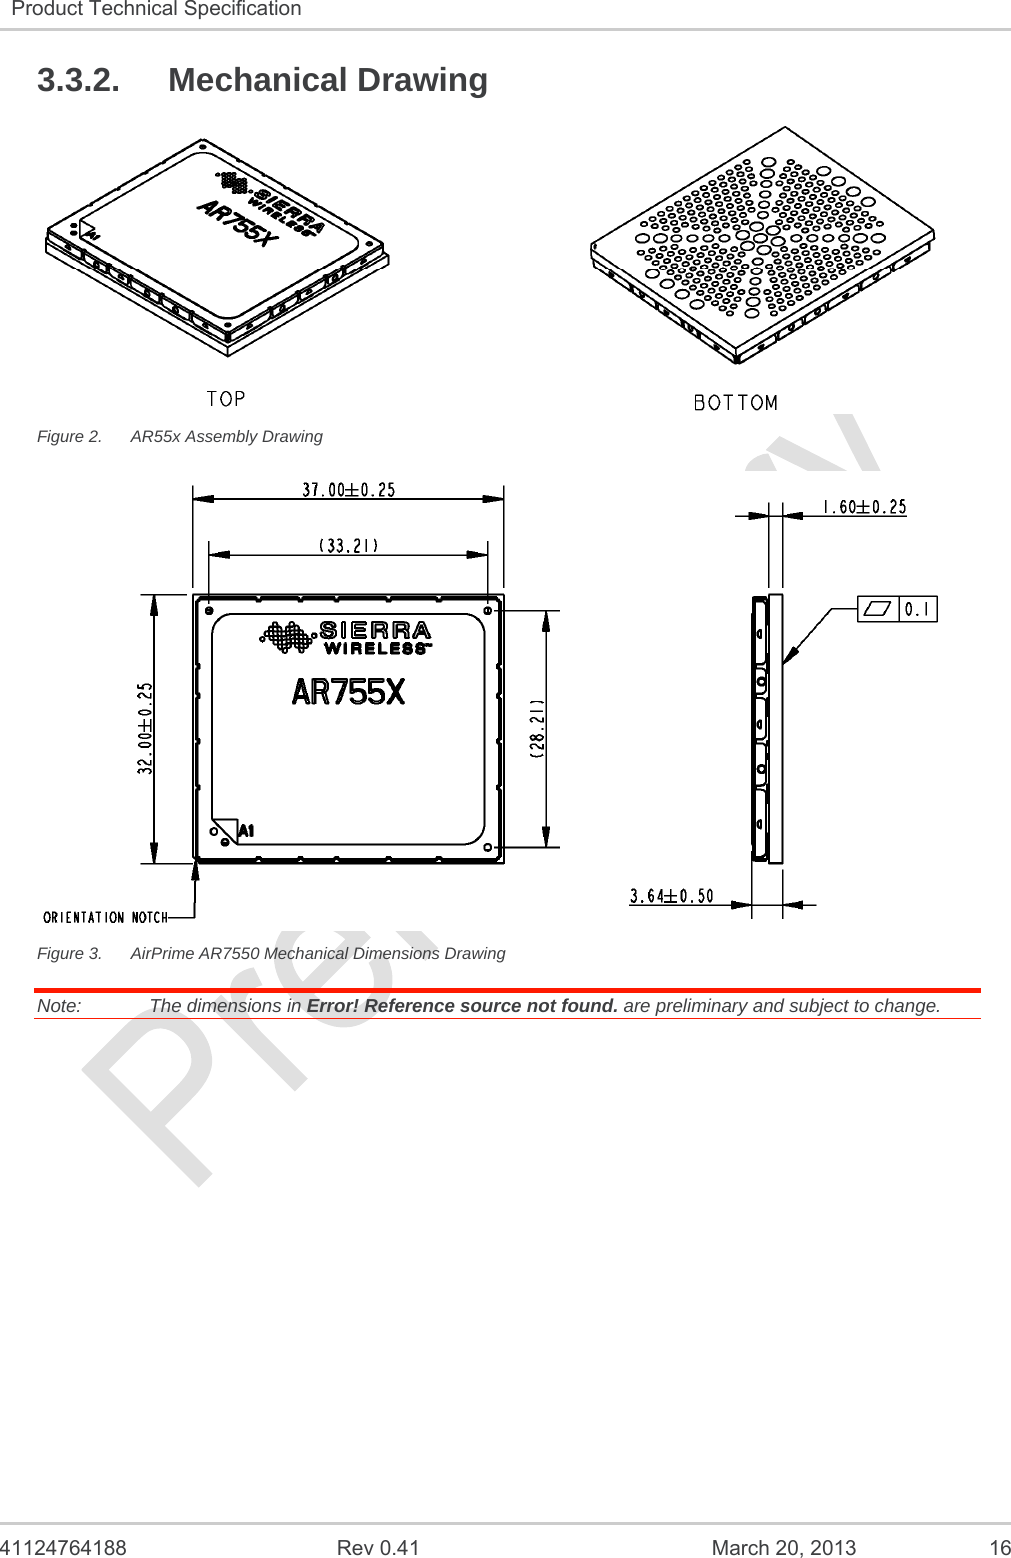   41124764188  Rev 0.41  March 20, 2013  16 Product Technical Specification   3.3.2. Mechanical Drawing  Figure 2.  AR55x Assembly Drawing  Figure 3.  AirPrime AR7550 Mechanical Dimensions Drawing Note:   The dimensions in Error! Reference source not found. are preliminary and subject to change.   